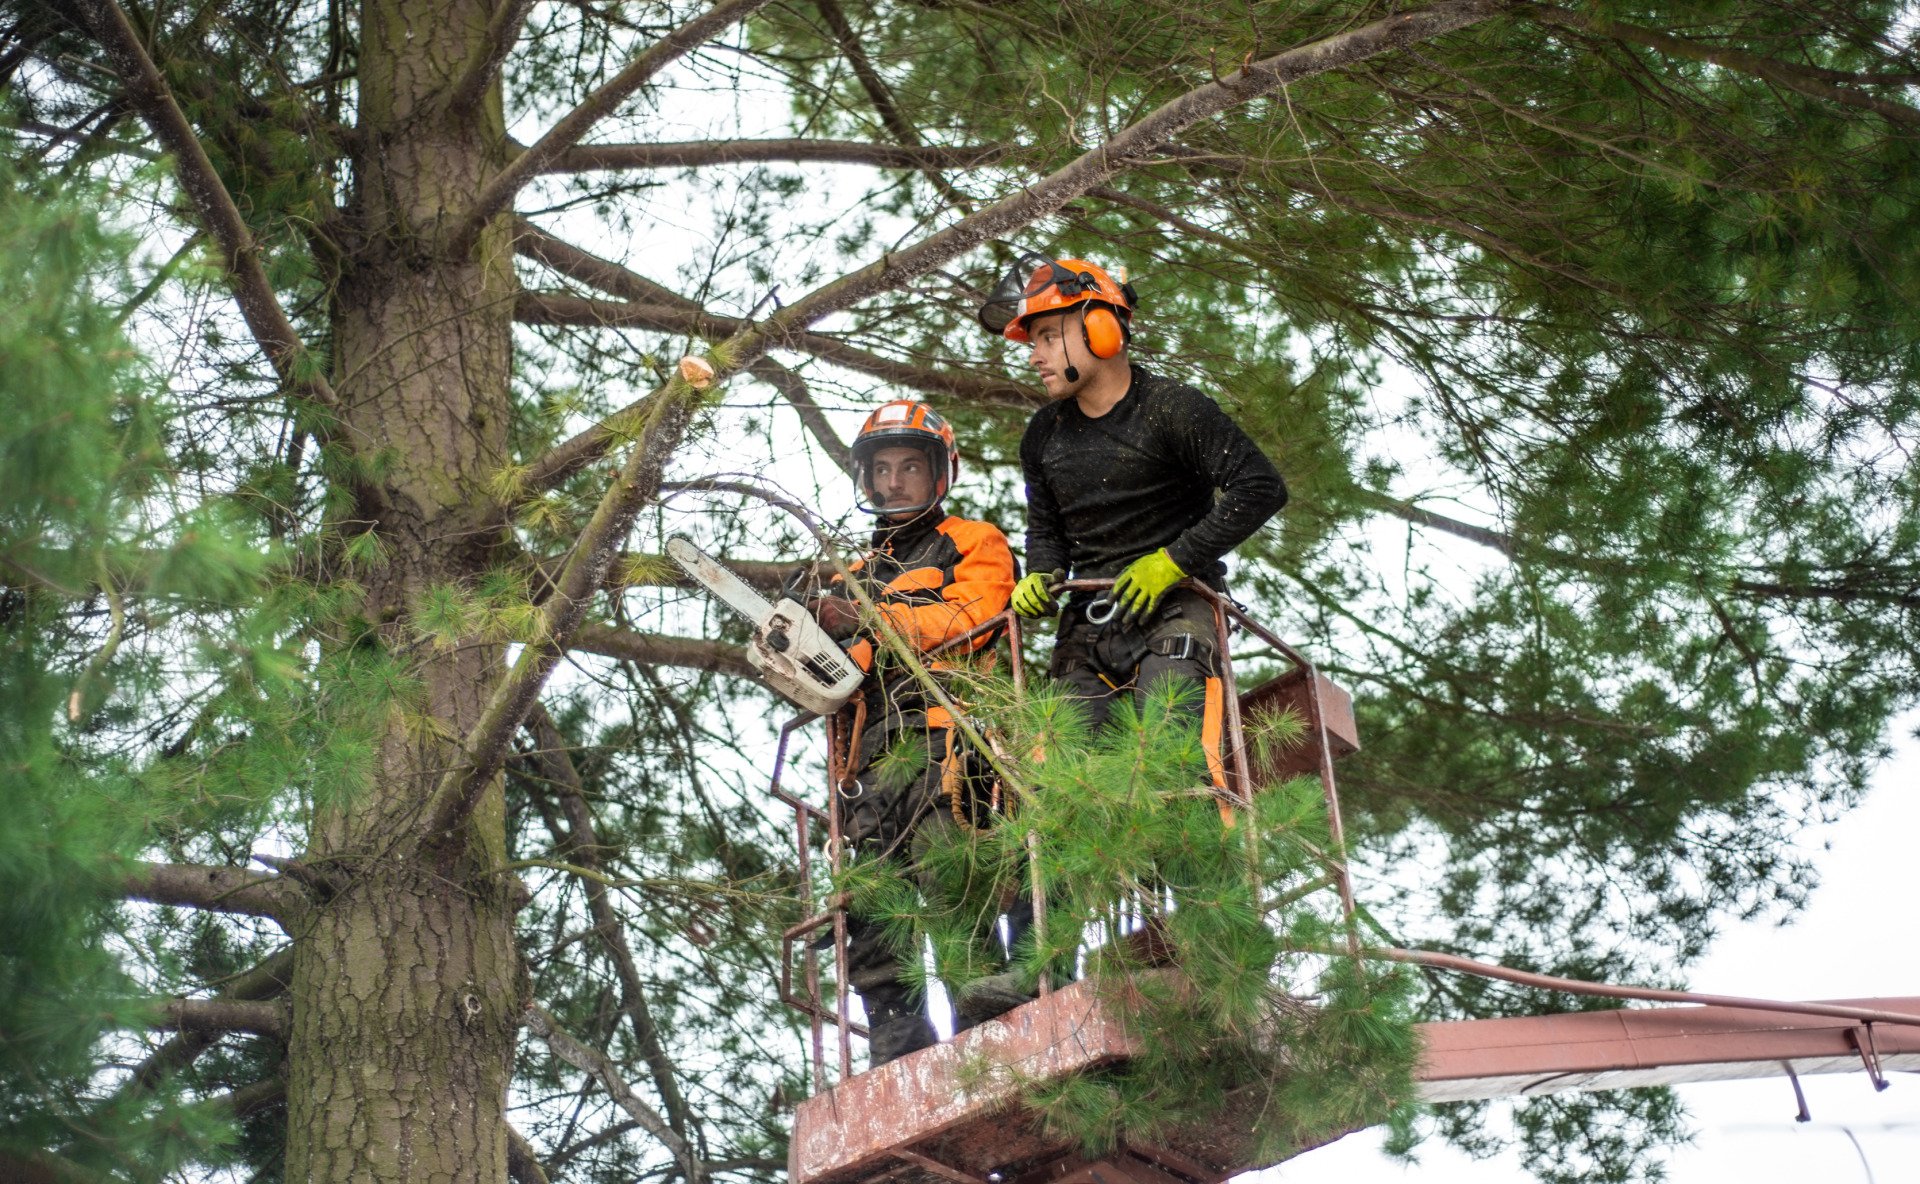 Taking all necessary precautions and using state-of-the-art equipment, our contractors have successfully carried out this emergency tree removal in Naples.